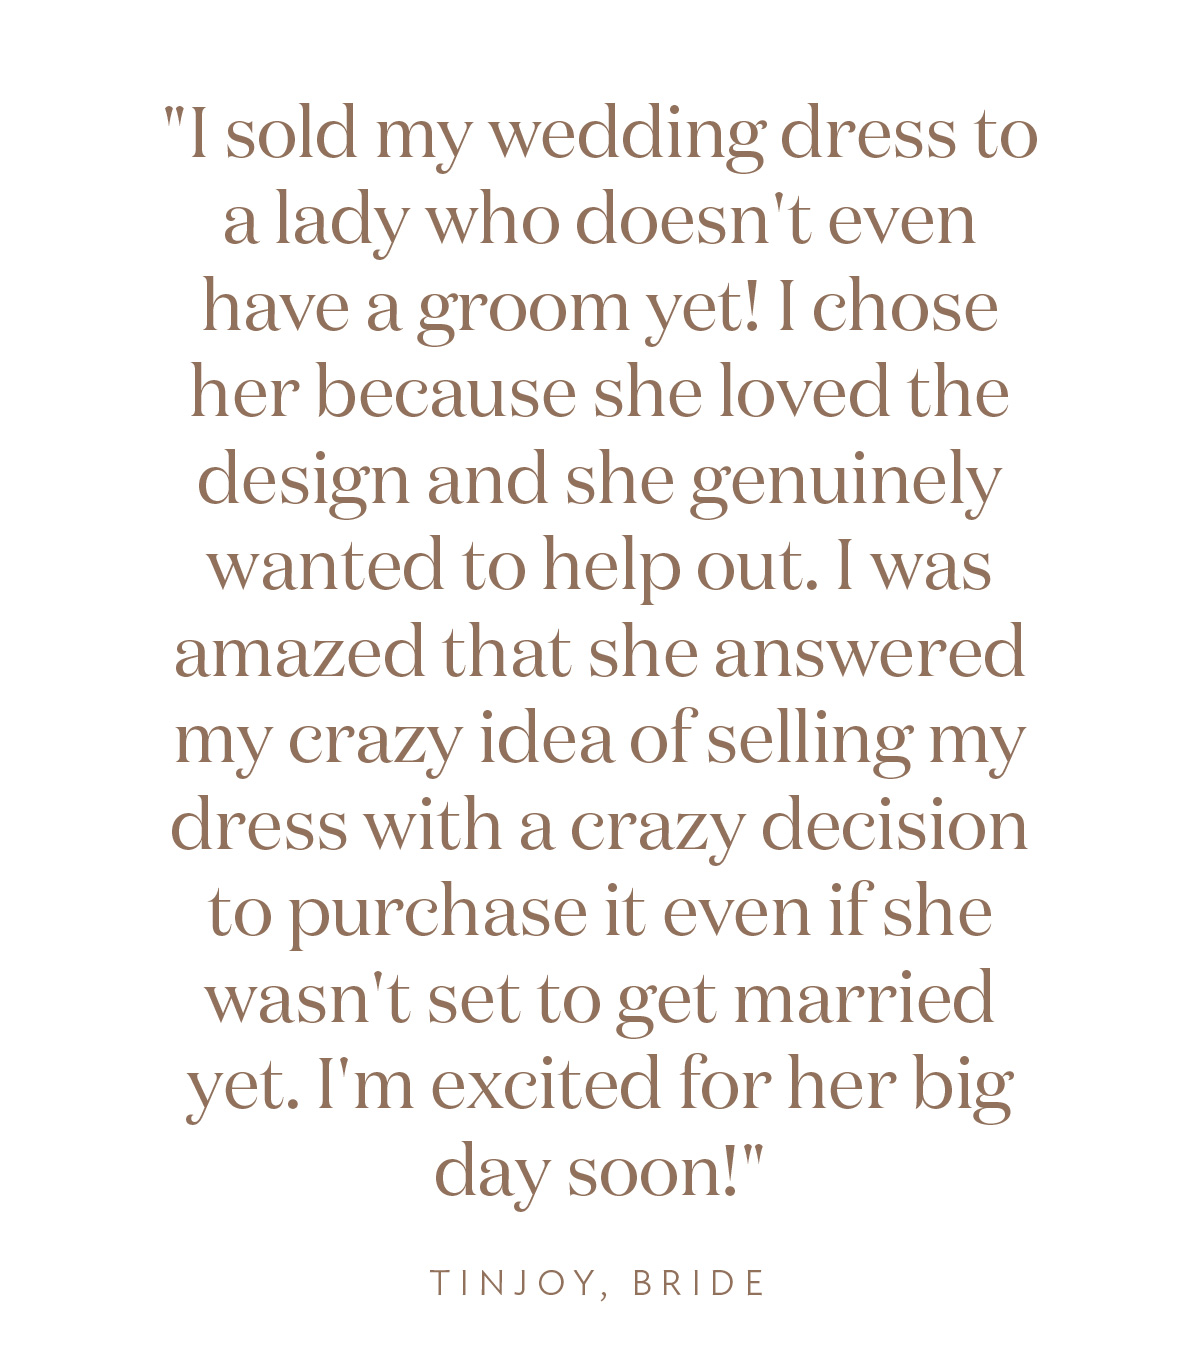 "I sold my wedding dress to a lady who doesn't even have a groom yet! I chose her because she loved the design and she genuinely wanted to help out. I was amazed that she answered my crazy idea of selling my dress with a crazy decision to purchase it even if she wasn't set to get married yet. I'm excited for her big day soon!" Tinjoy, Bride